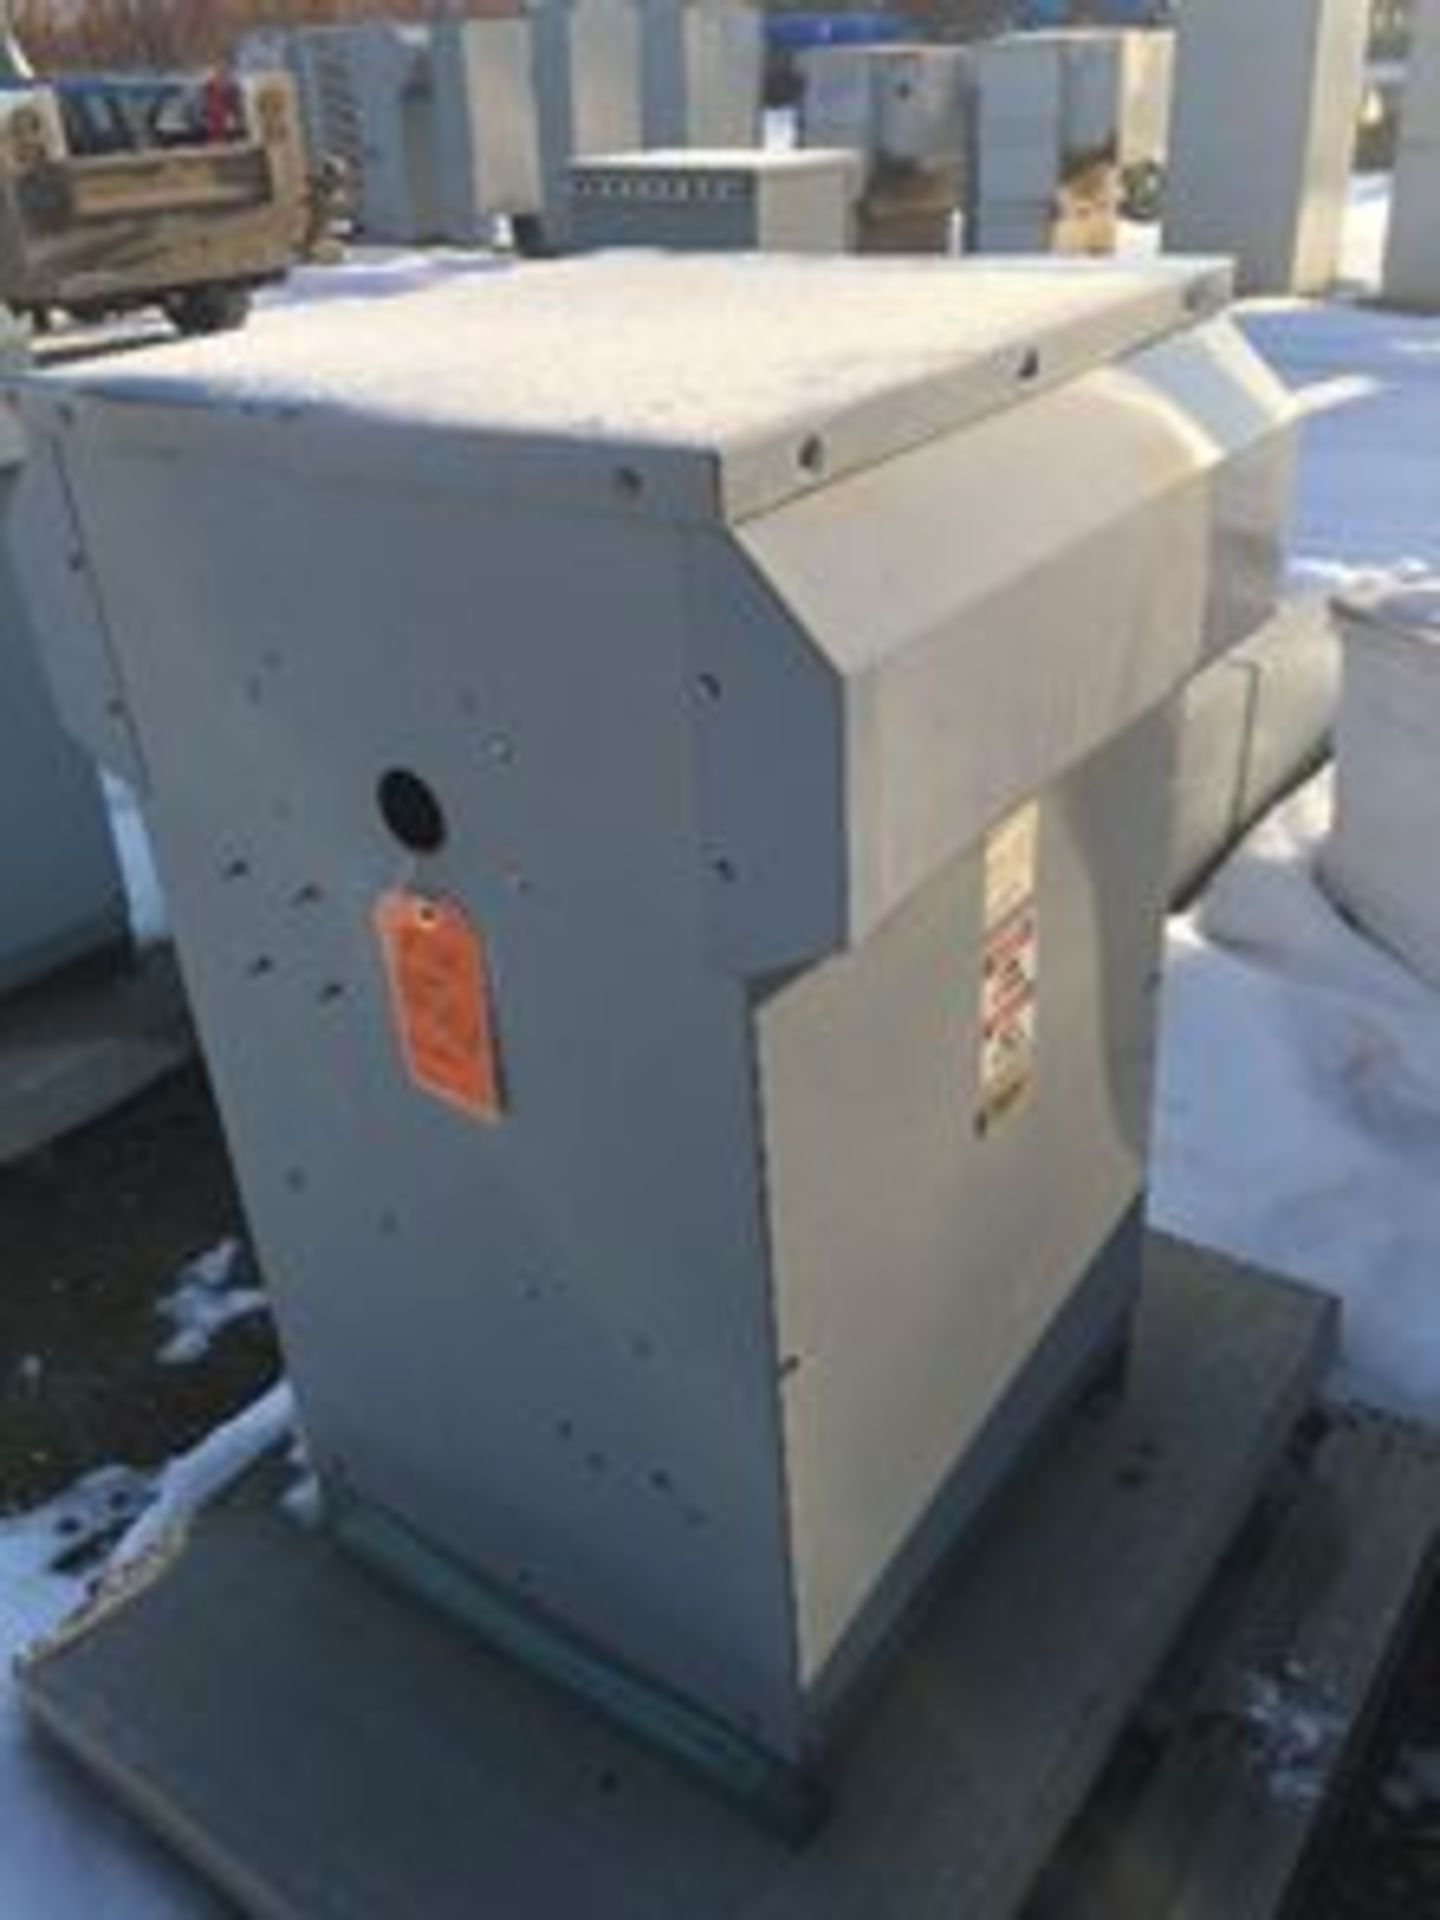 MTE Harmonic Filters. Lot: Qty (4) Harmonic Filters. EOG Stock #900004. Asset Located in Stanley, ND